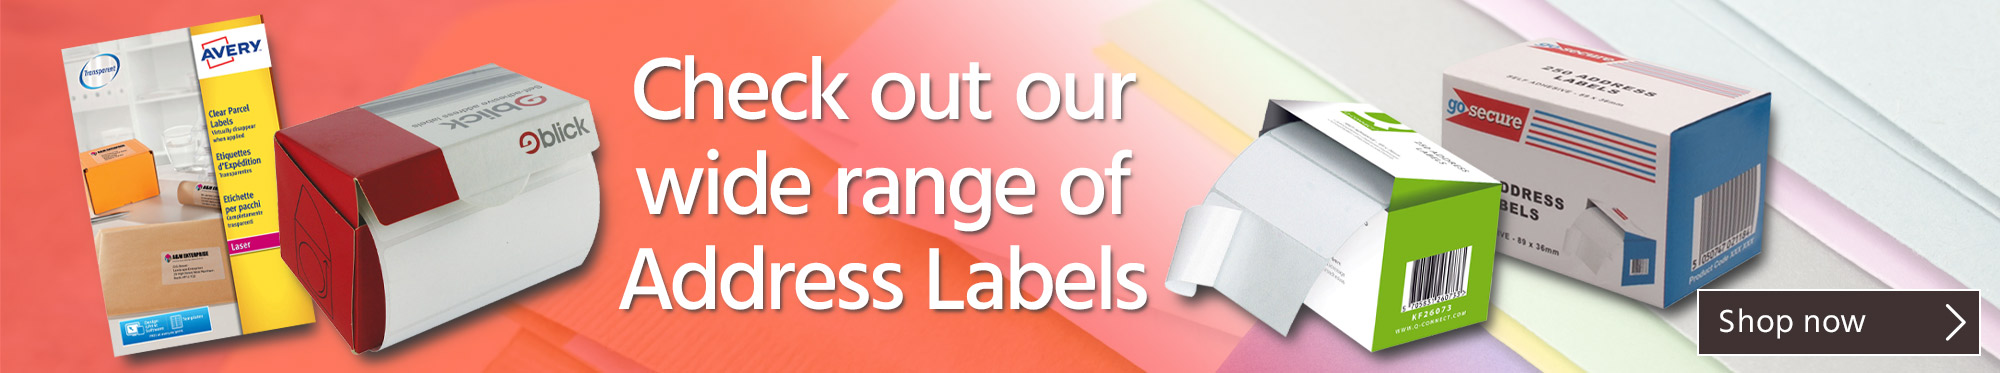 Check Out Our Wide Range of Address Labels